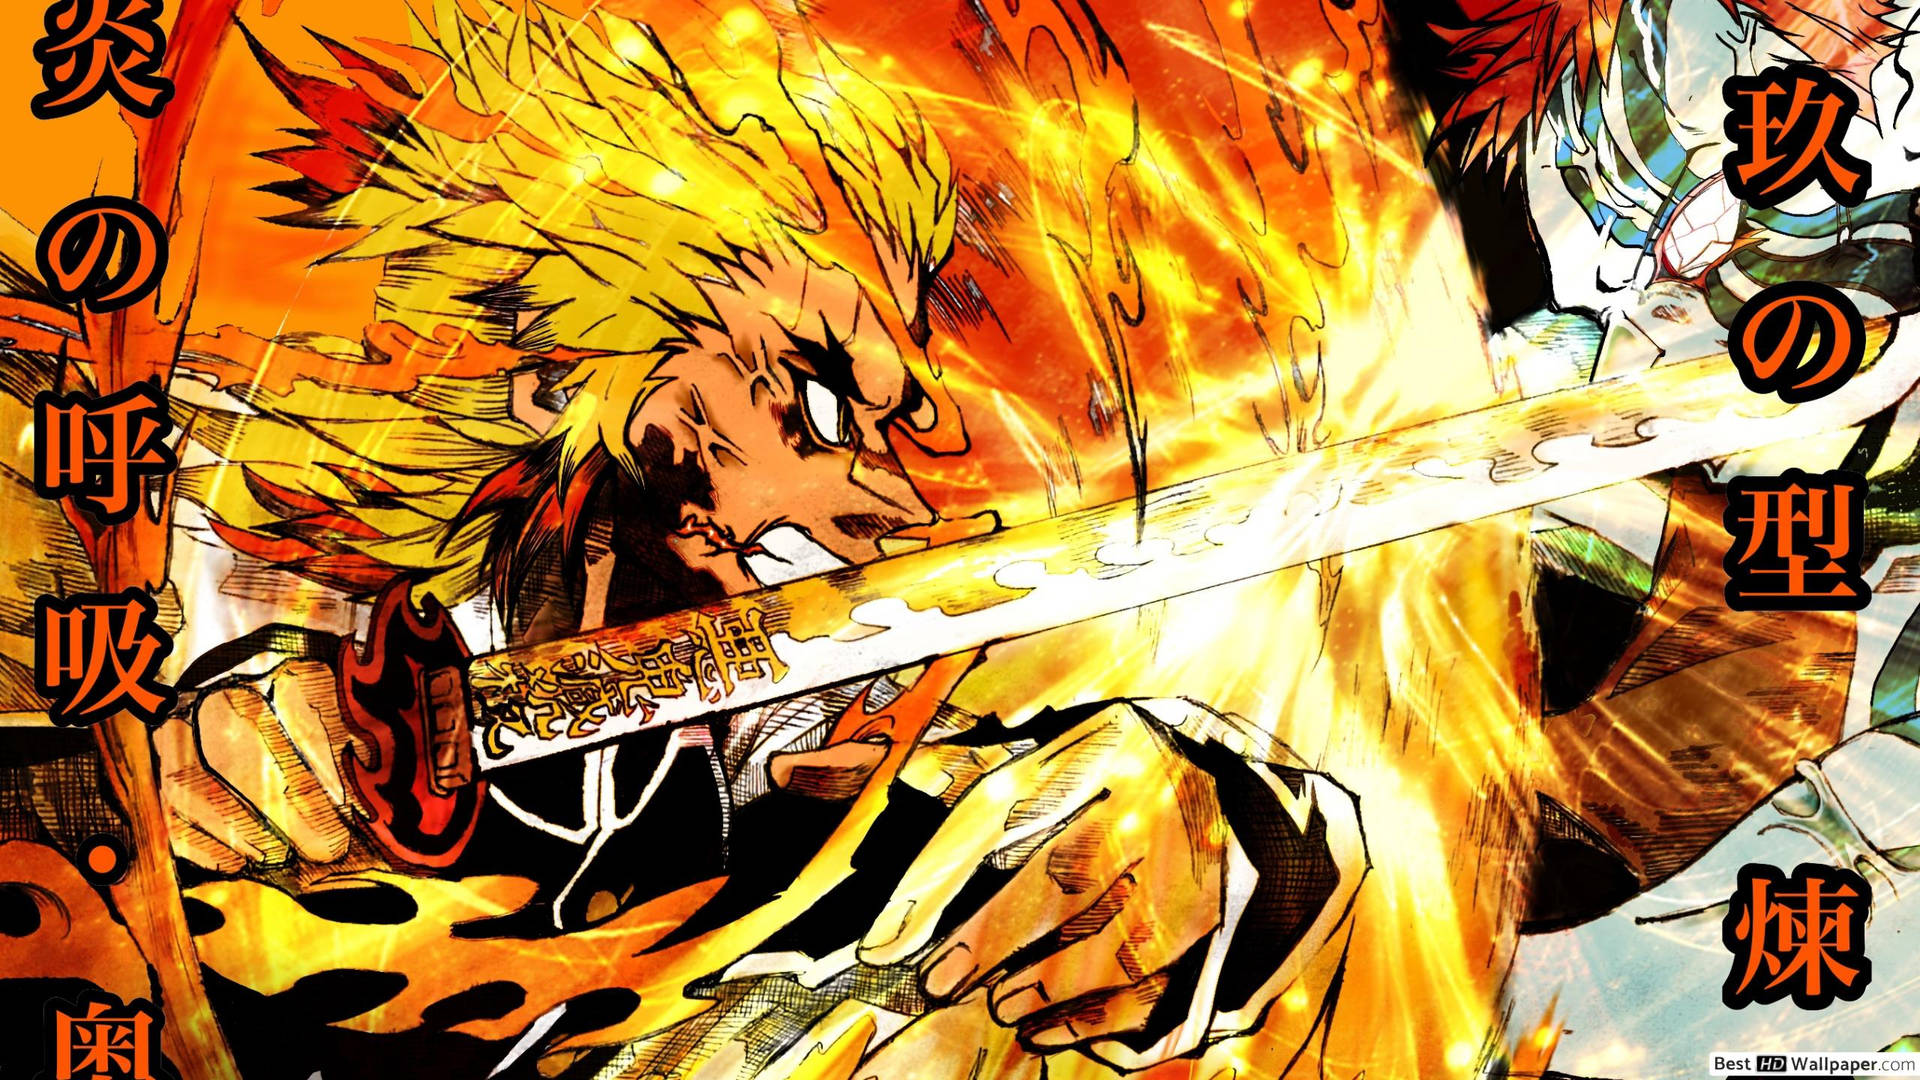 Rengoku Kyoujurou fighting with Akaza in the Flame Breath Form wallpaper.